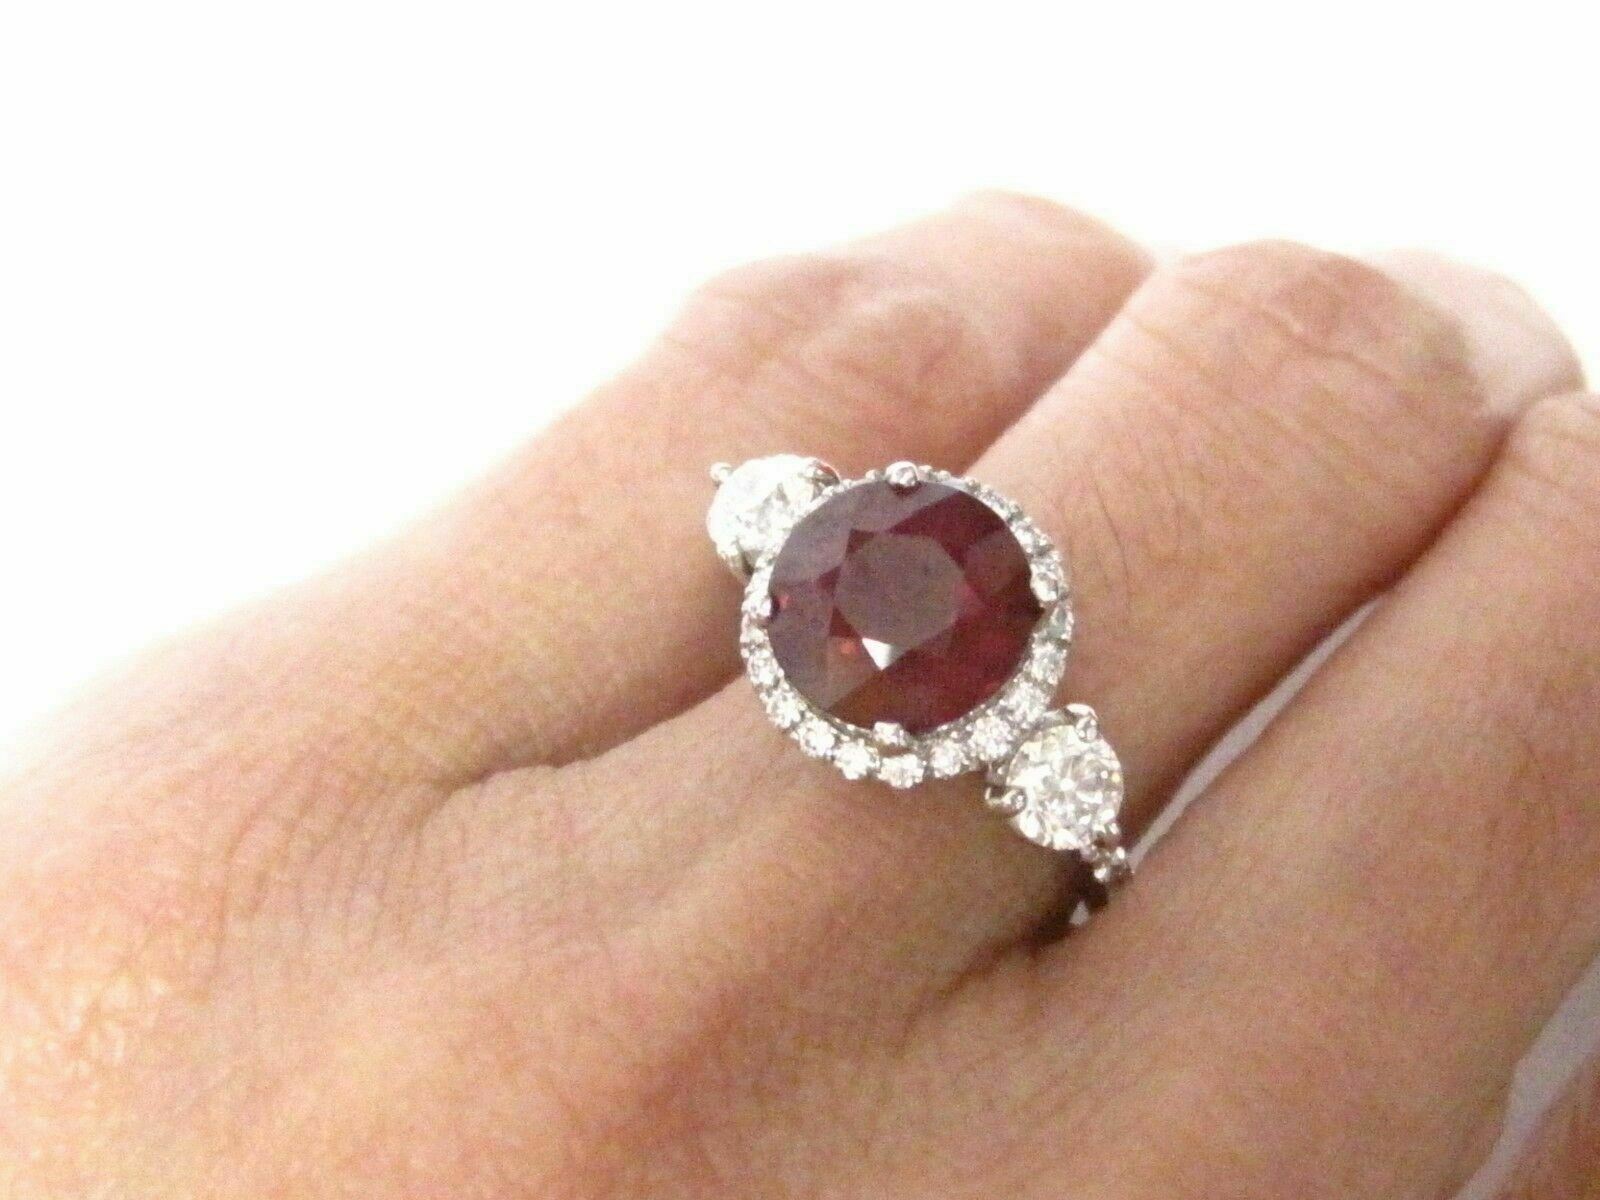 4.63 TCW Natural Three Roud Ruby w/ Diamond Accents Gem Ring 14k White Gold